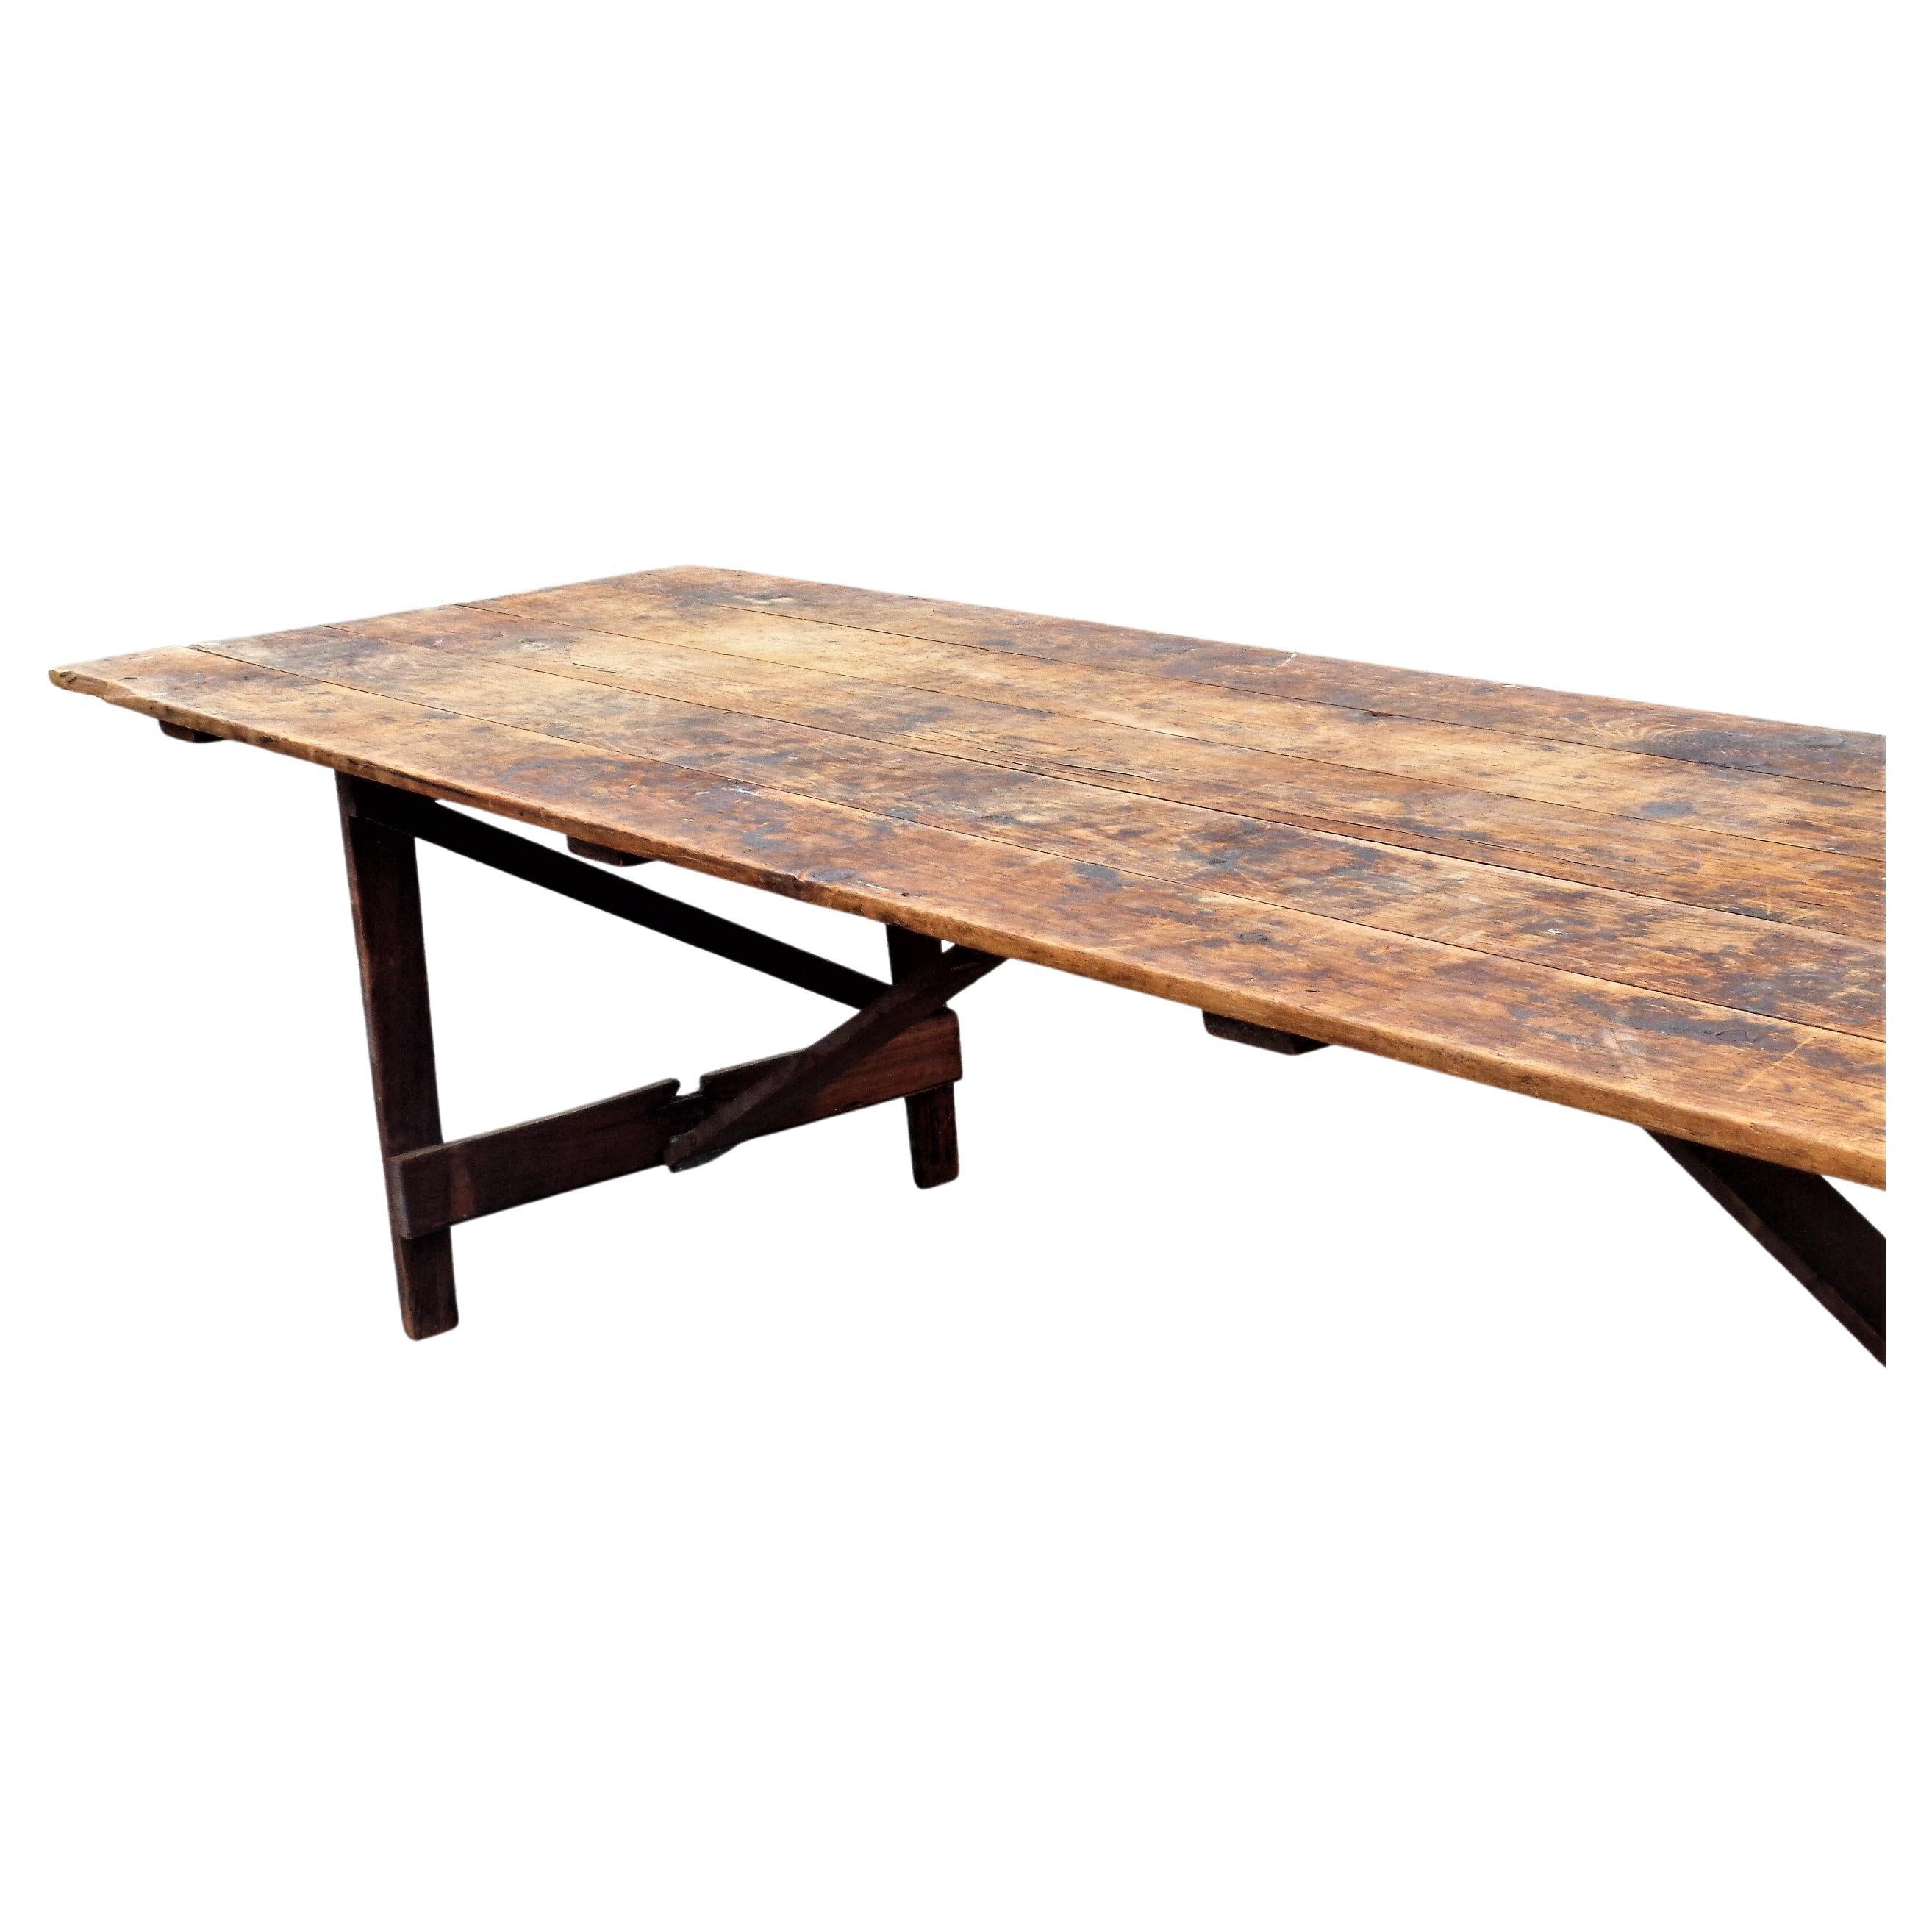  Antique American grange farm harvest table with fold up legs. Overall perfectly aged original undisturbed surface color patina. Structurally rock solid strong with no wobble. Measures 132 inches long x 36 inches wide x 28 inches high w/ the top